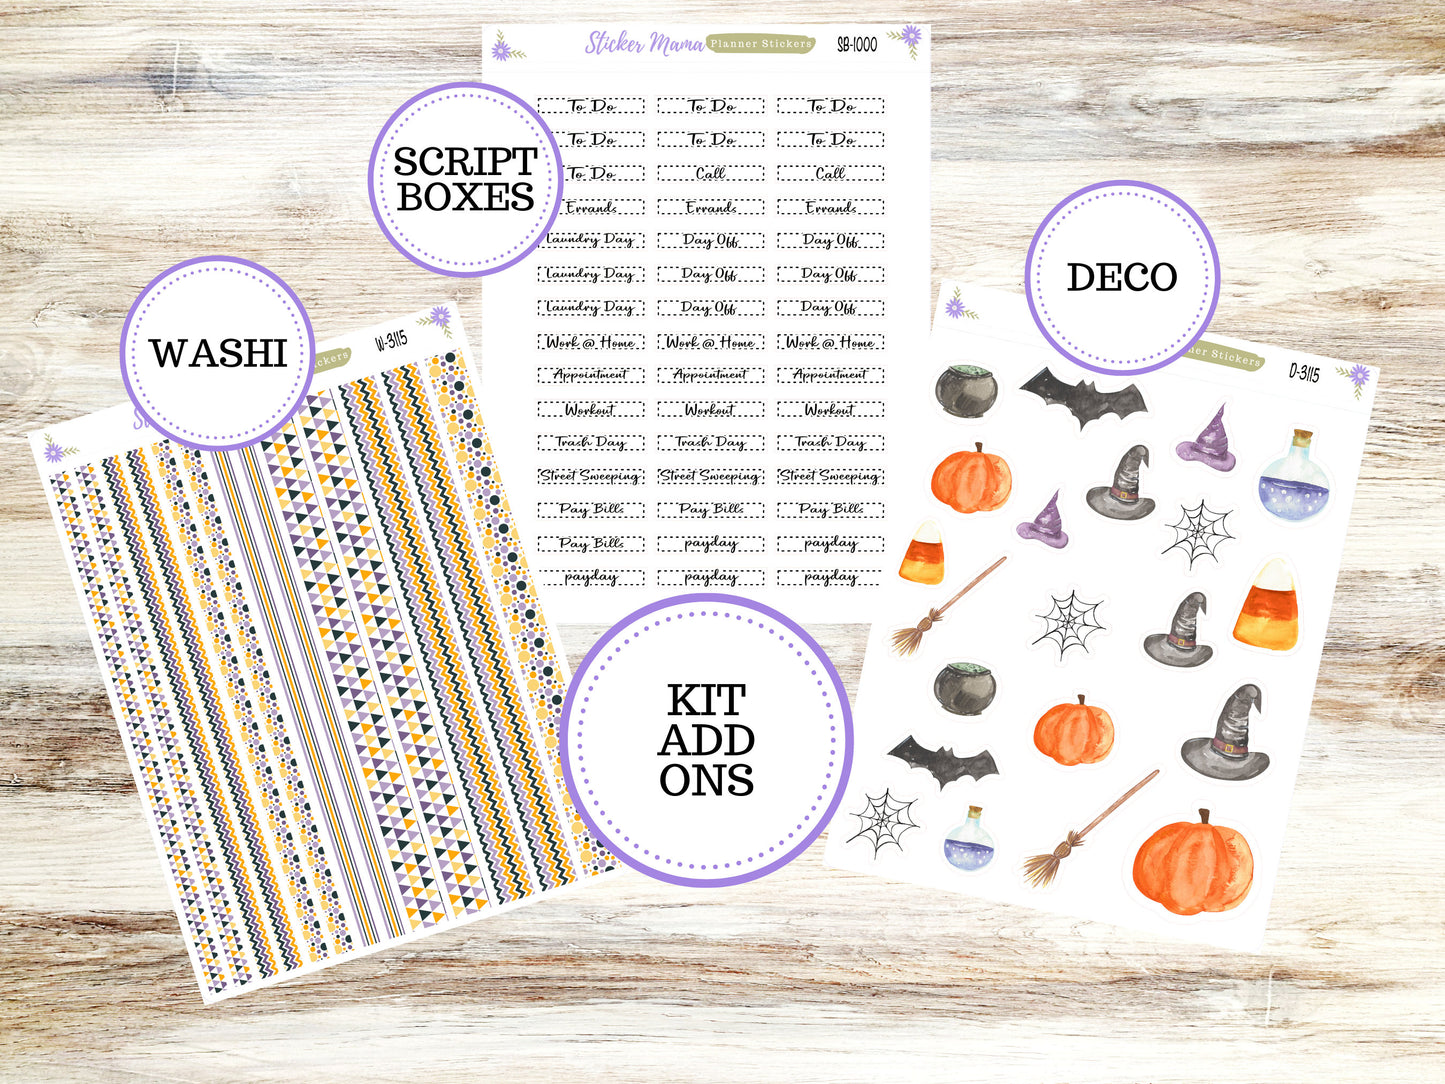 DAILY DUO 7x9-Kit #3115 || Spooky Palette || Erin Condren Planner Stickers - Daily Duo 7x9 Planner - Daily Duo Stickers - Daily Planner